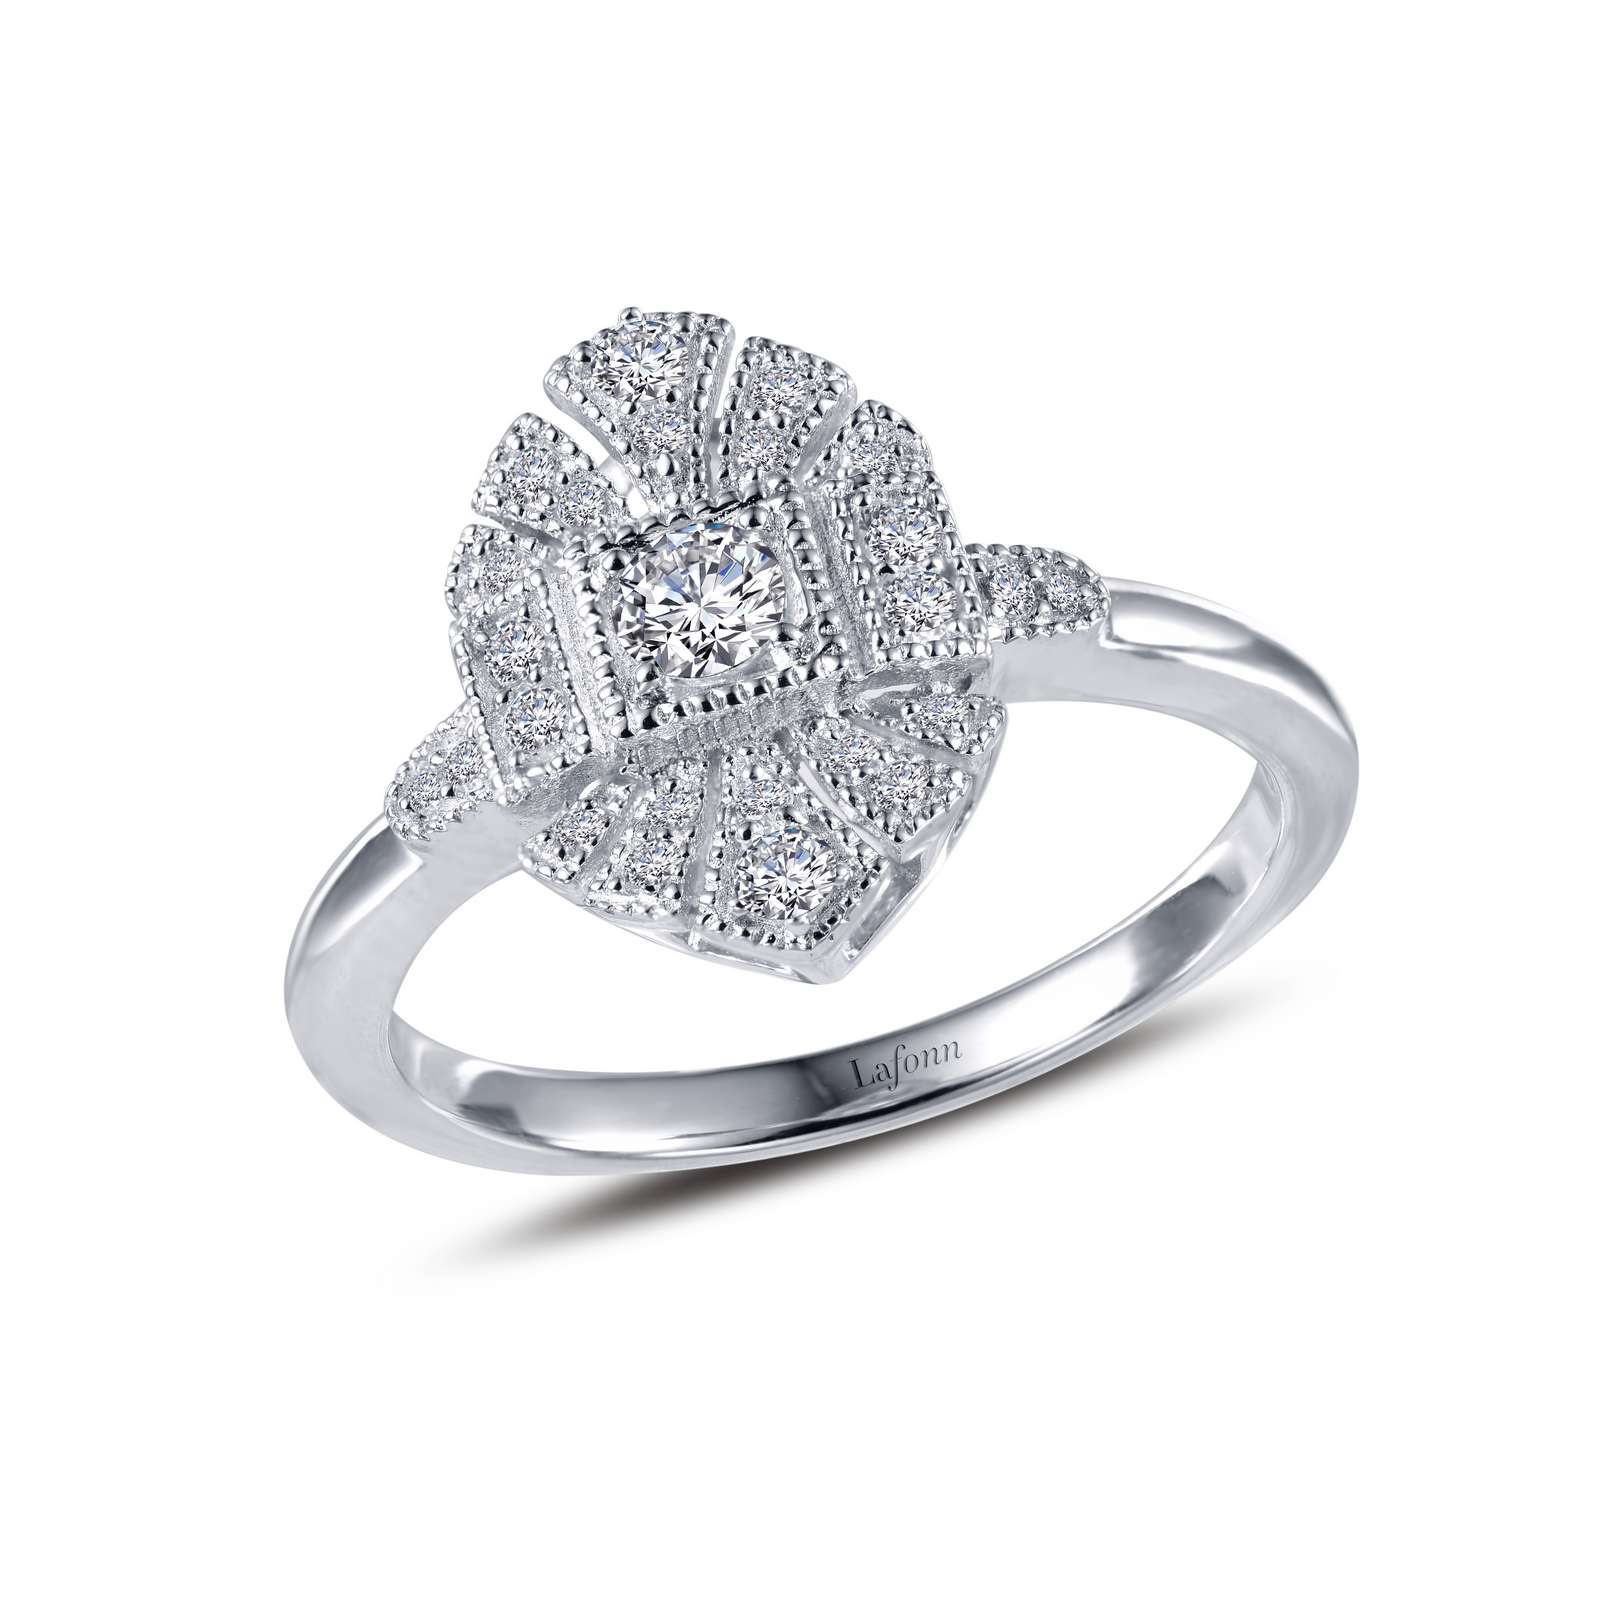 Heritage Simulated Diamond Platinum Bonded Ring Griner Jewelry Co. Moultrie, GA